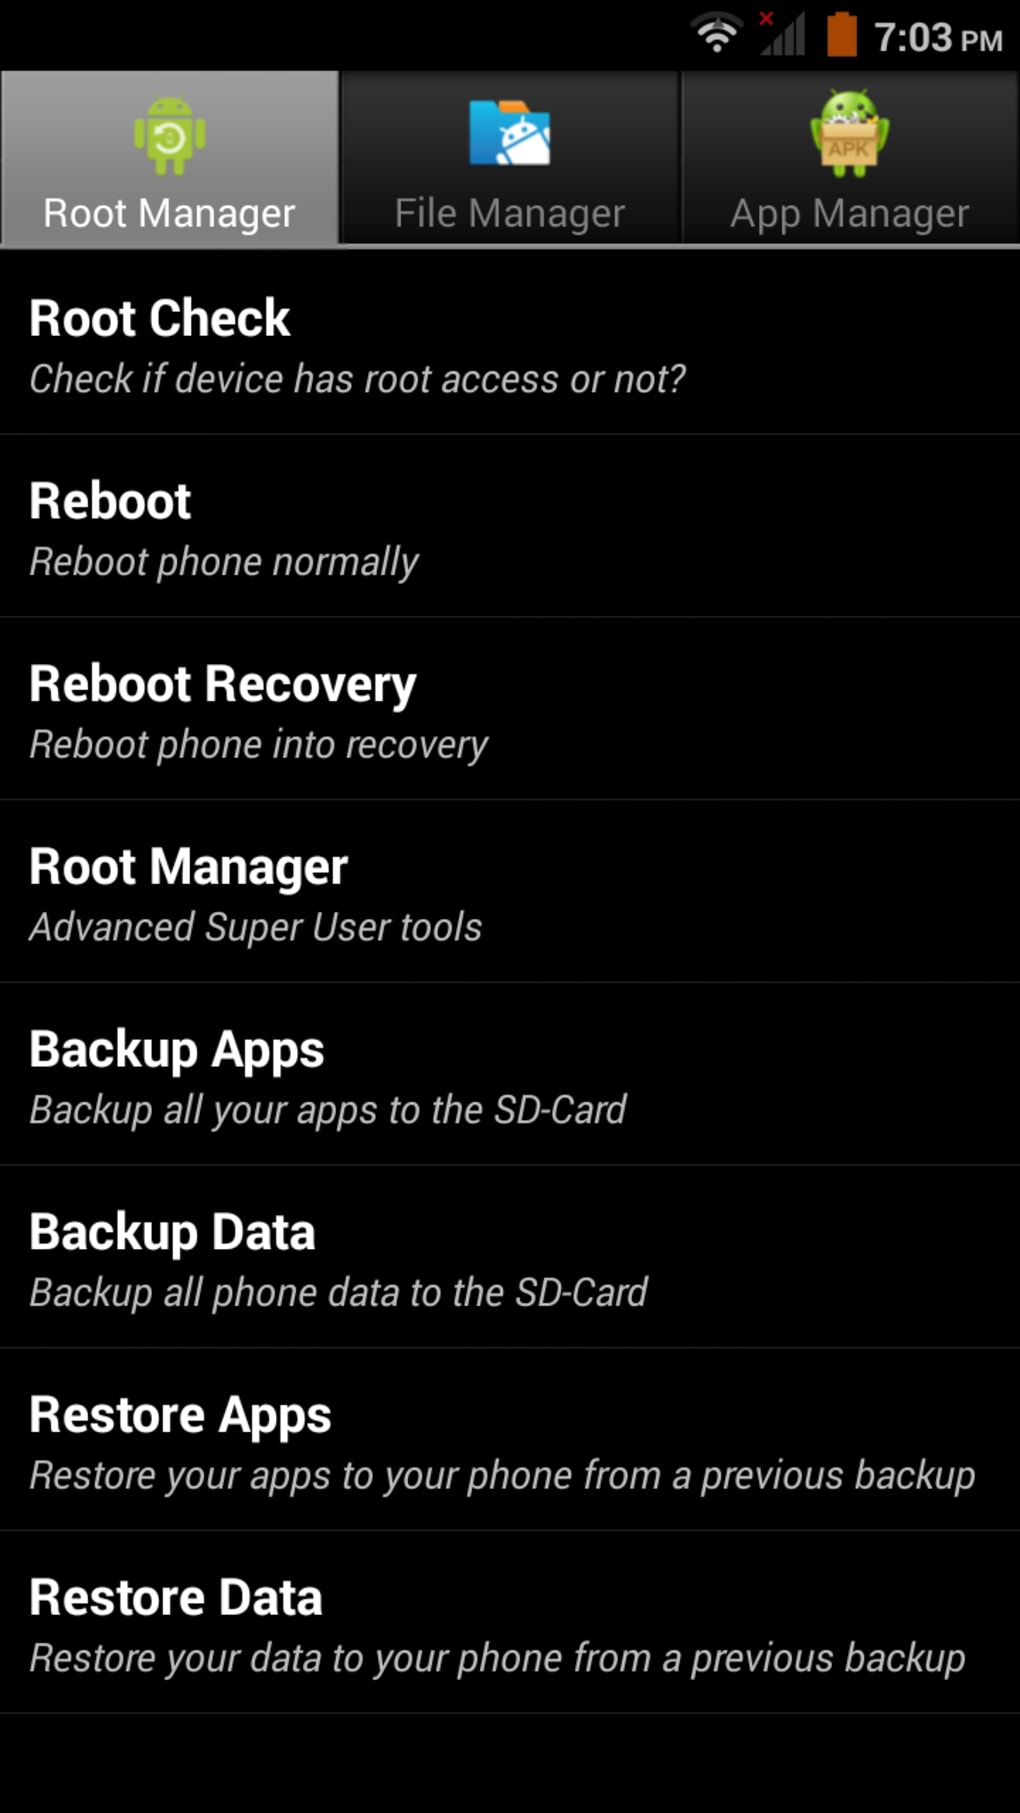 Root apps for Android. Root менеджер. Root доступ на андроид. Инструмент roots. Root tool